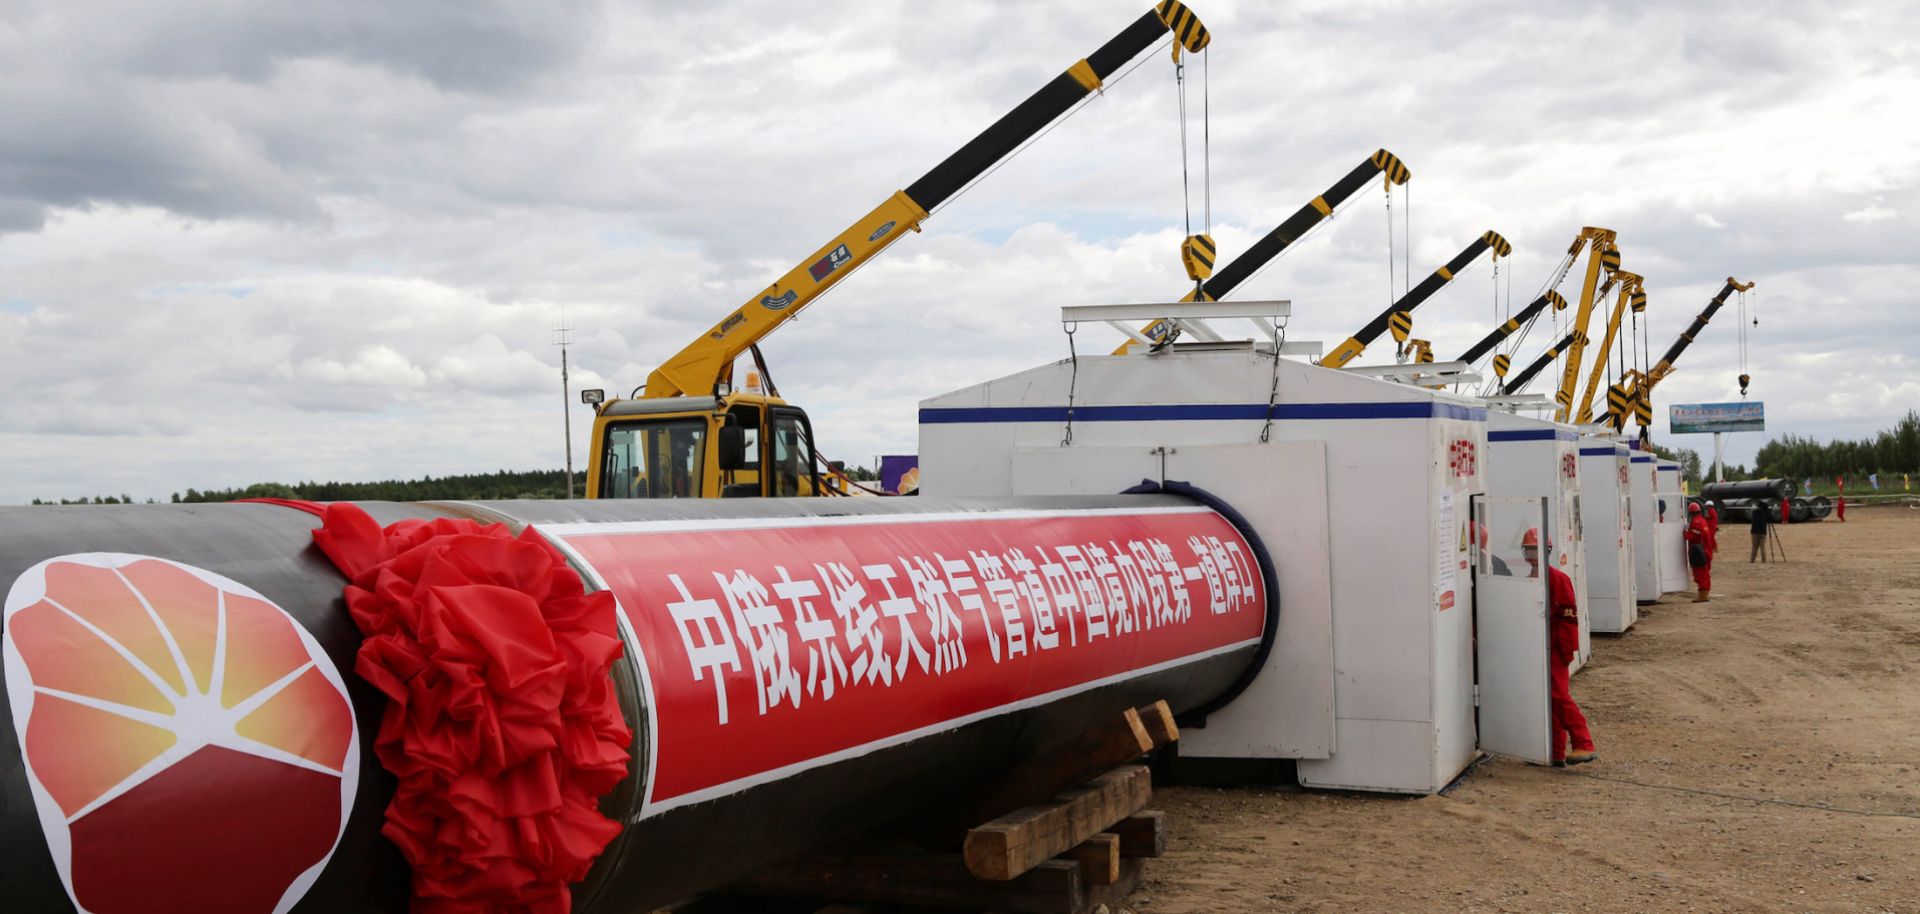 This June 29, 2015, file image shows the start of construction of the China-Russia east-route natural gas pipeline near Heihe, China.